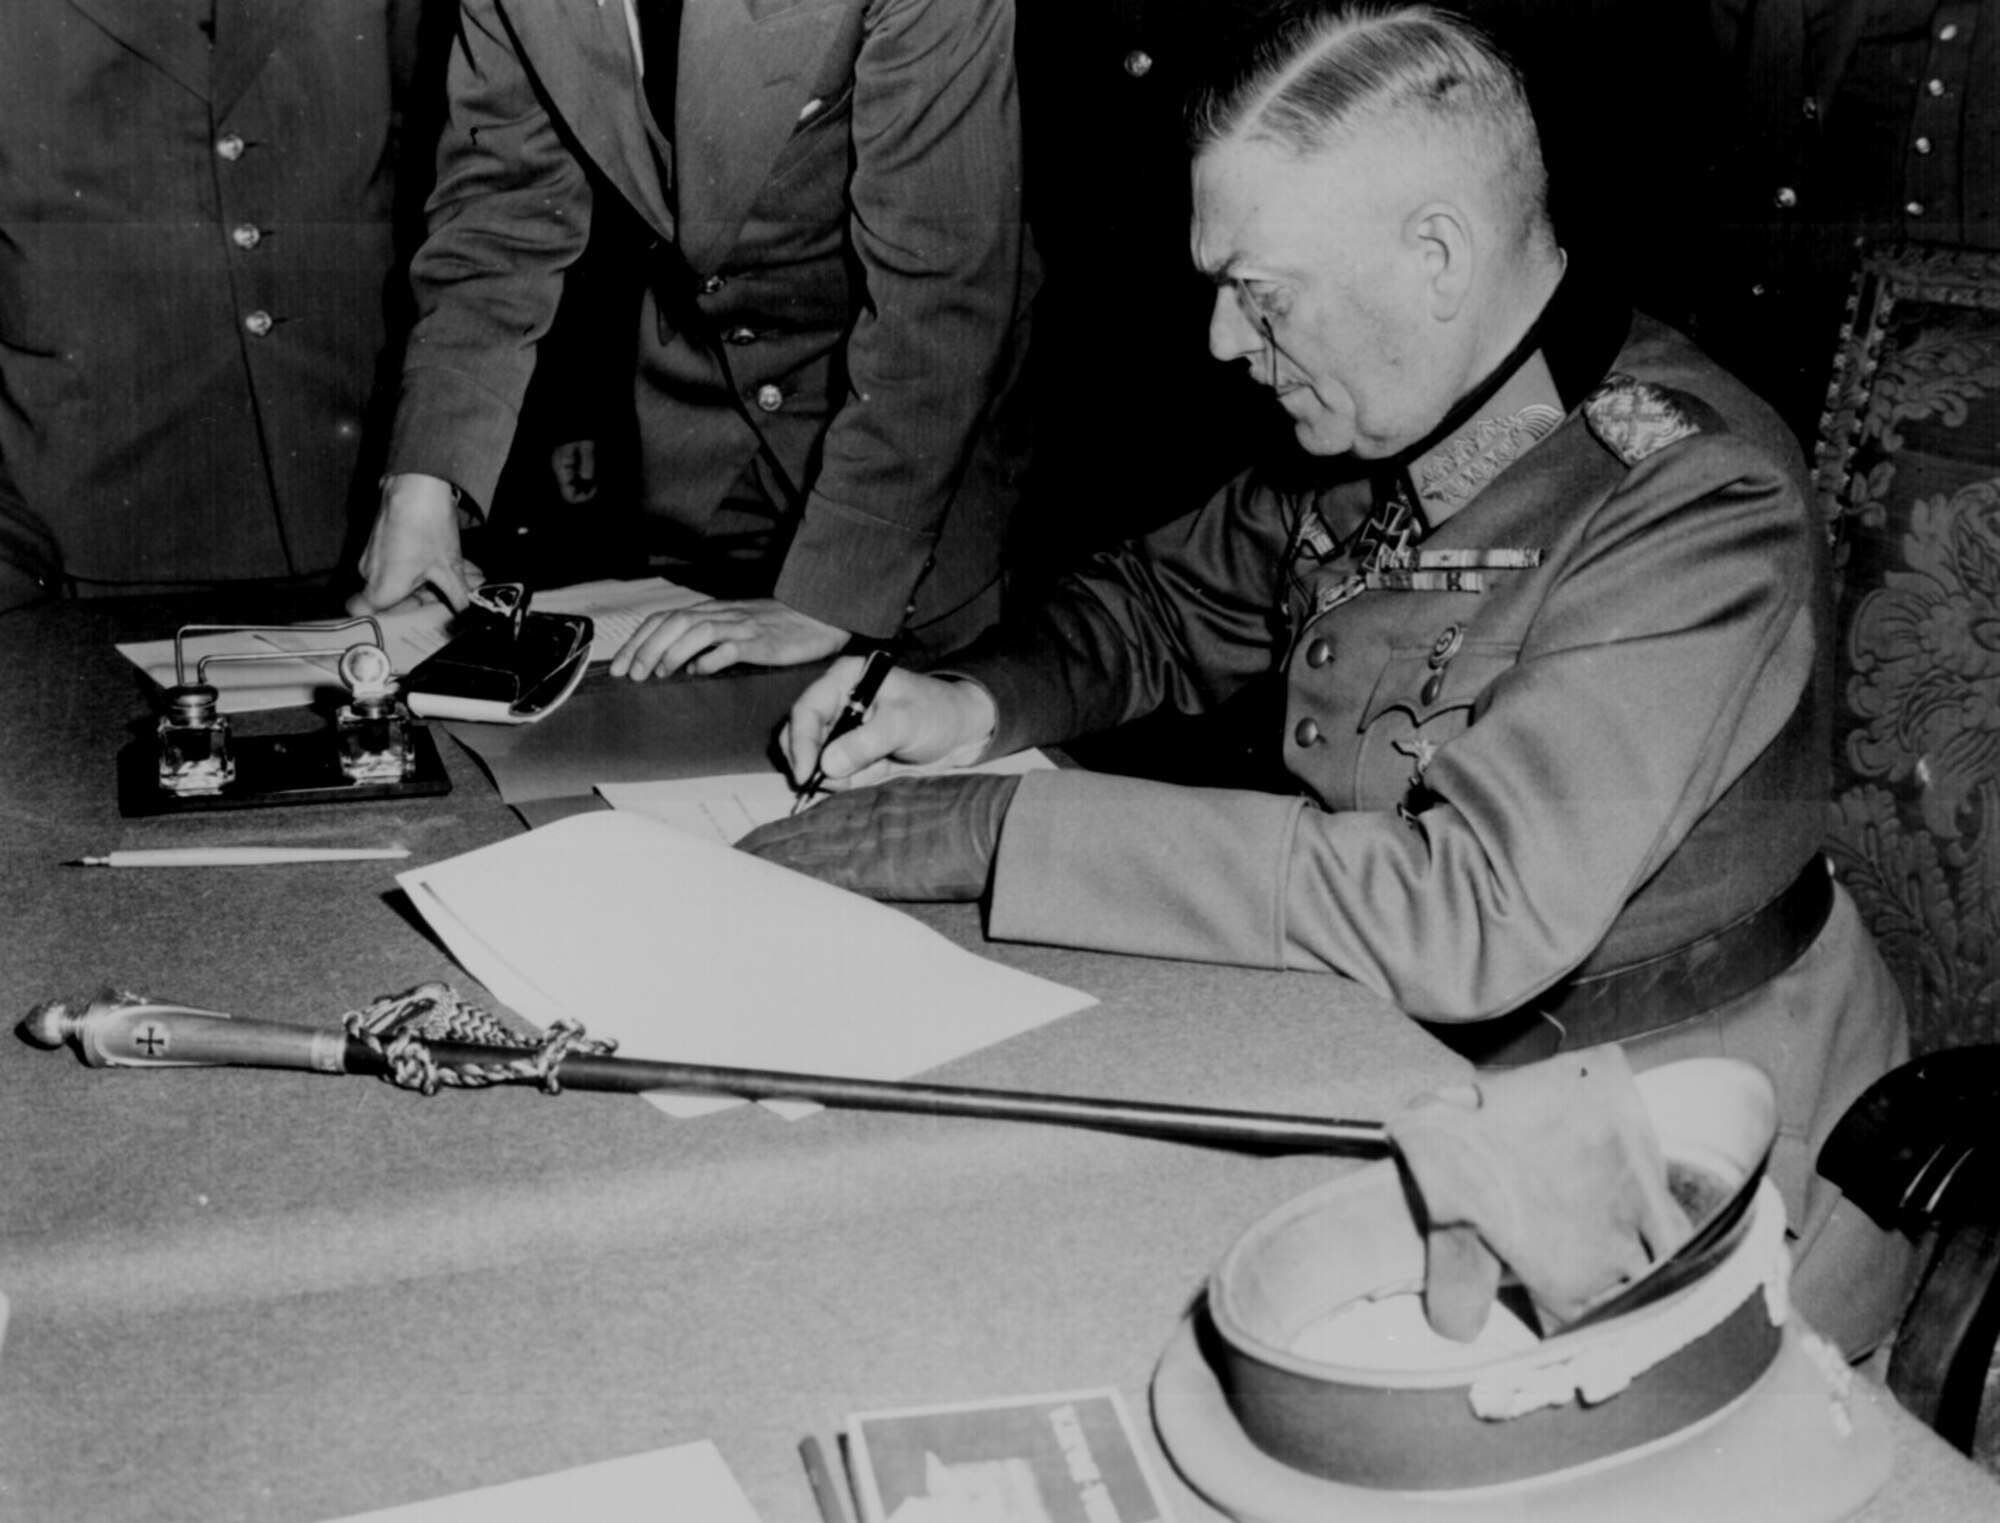 Field Marshall Wilhelm Keitel signs the ratified surrender terms for the German Army at Russian Headquarters, May 7, 1945, Berlin Germany.